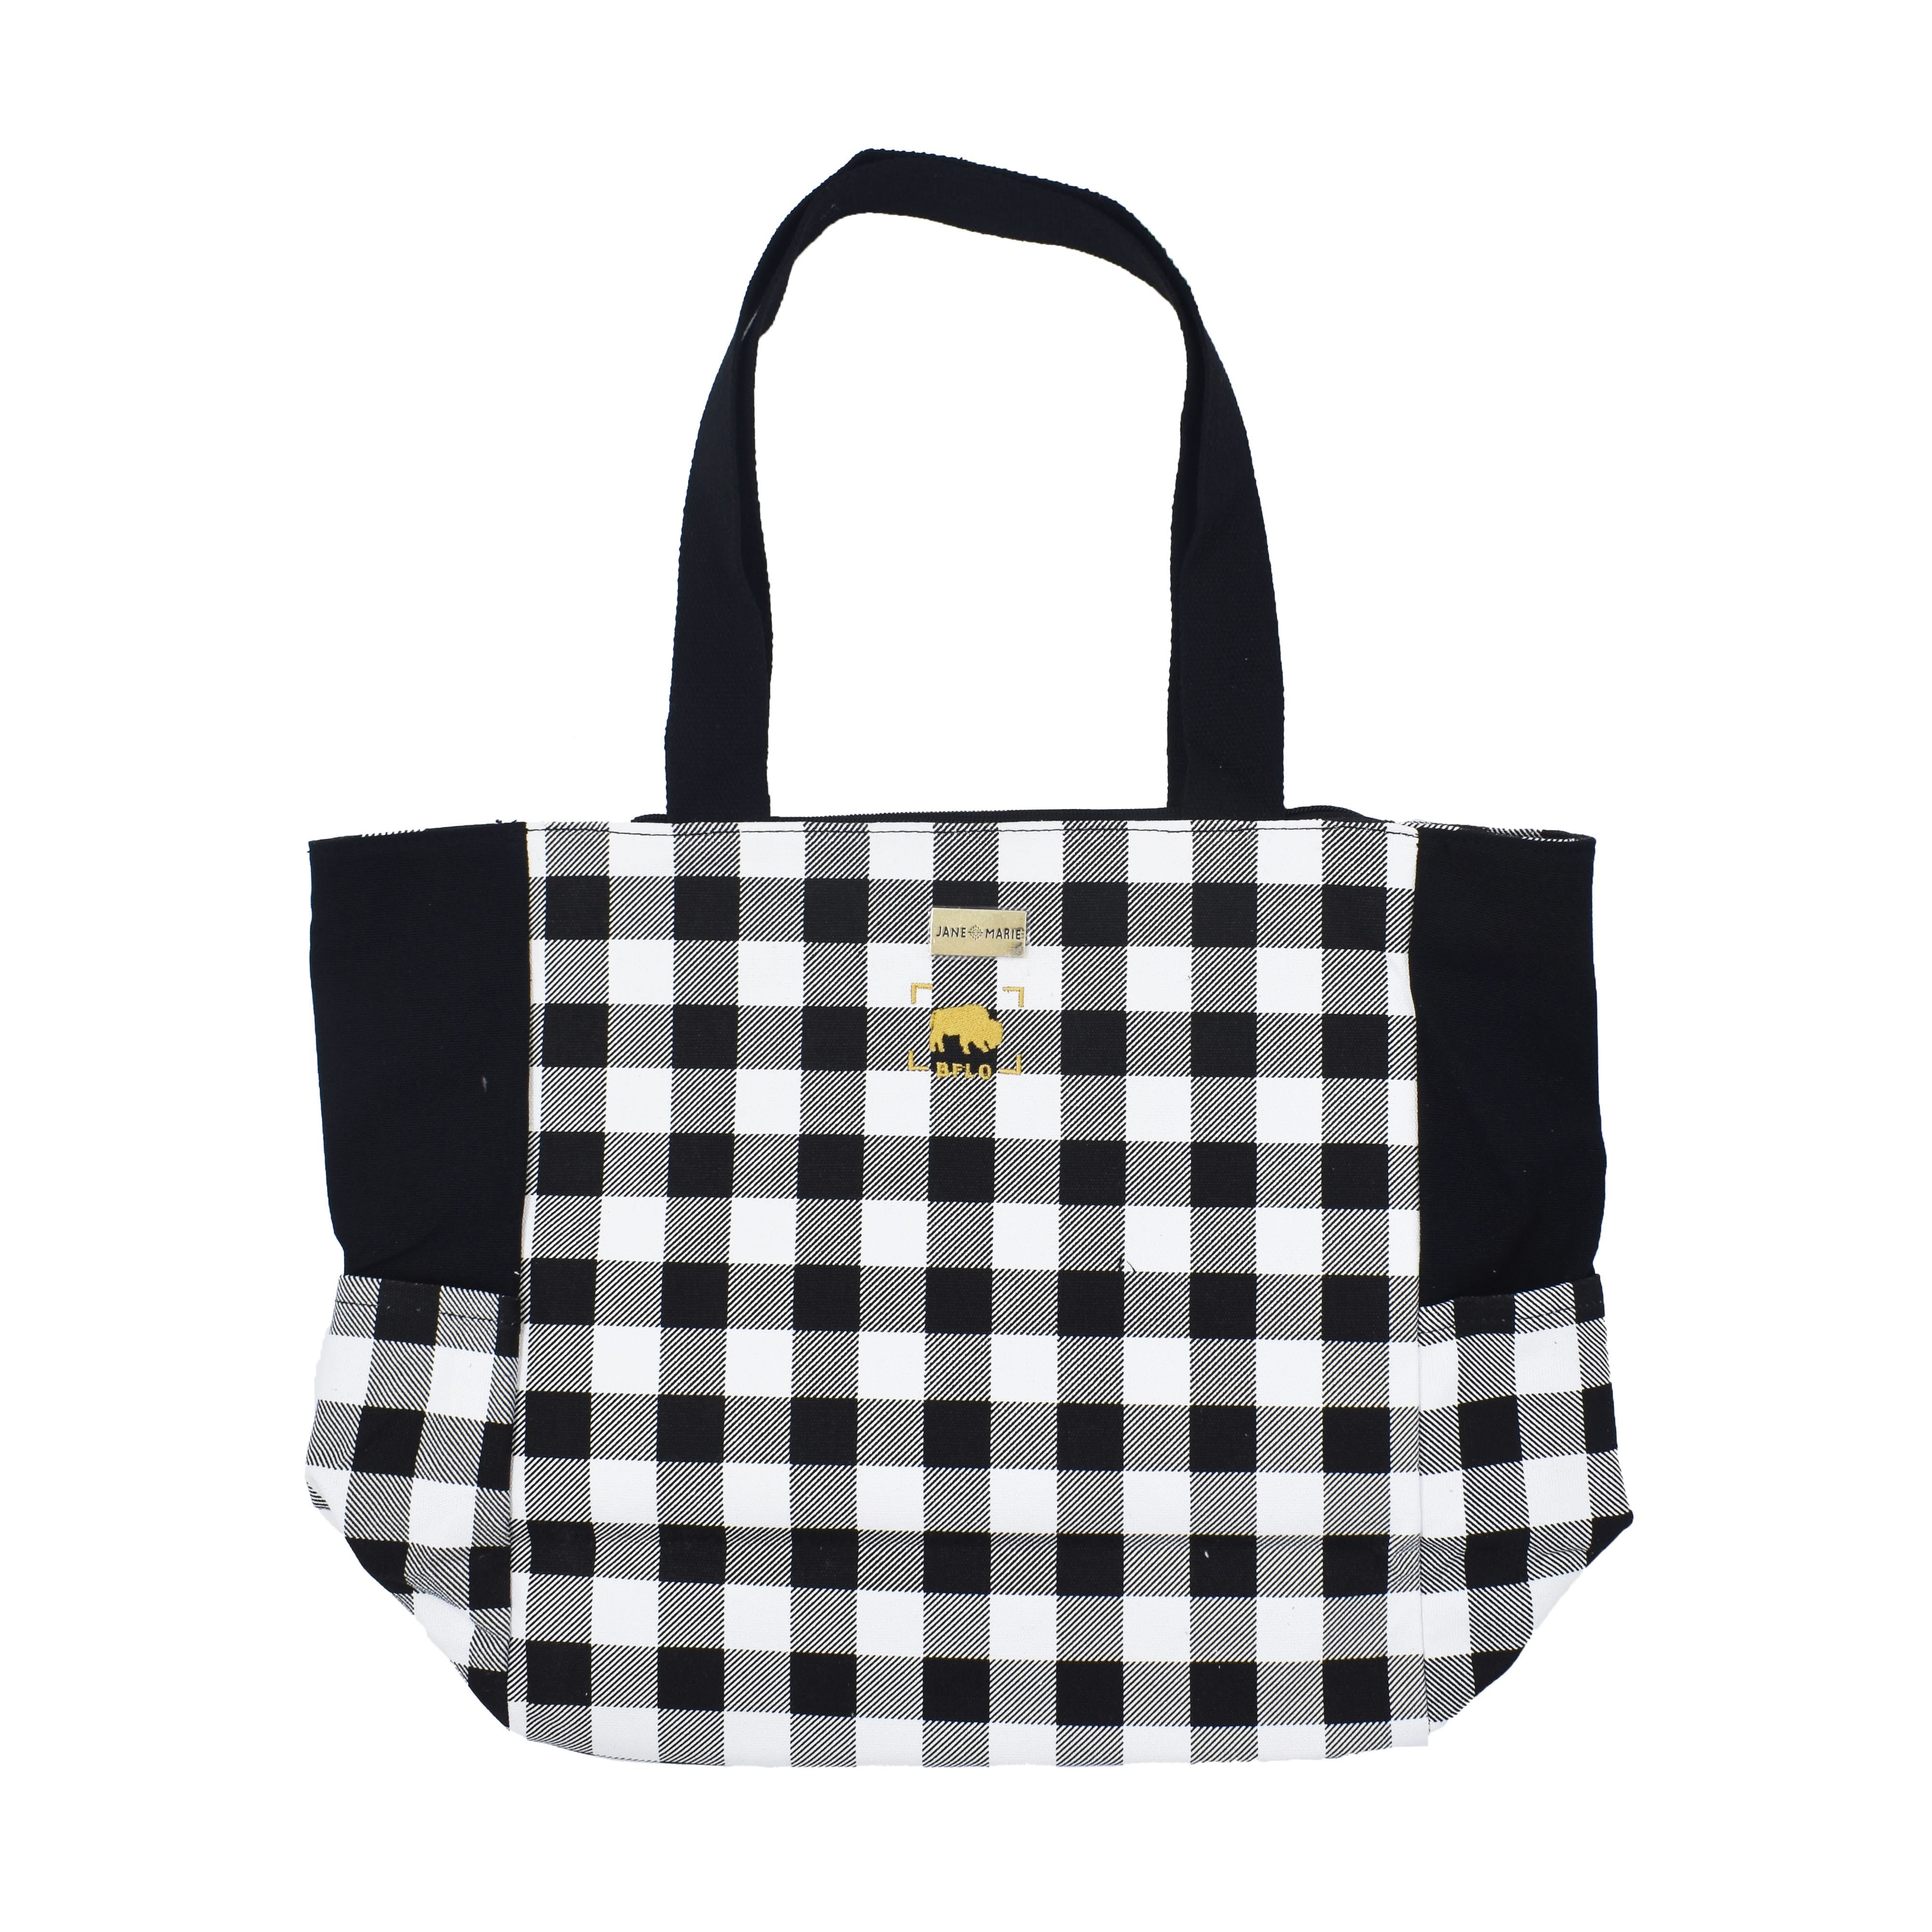 BFLO Black and White Canvas Tote Bag | The BFLO Store